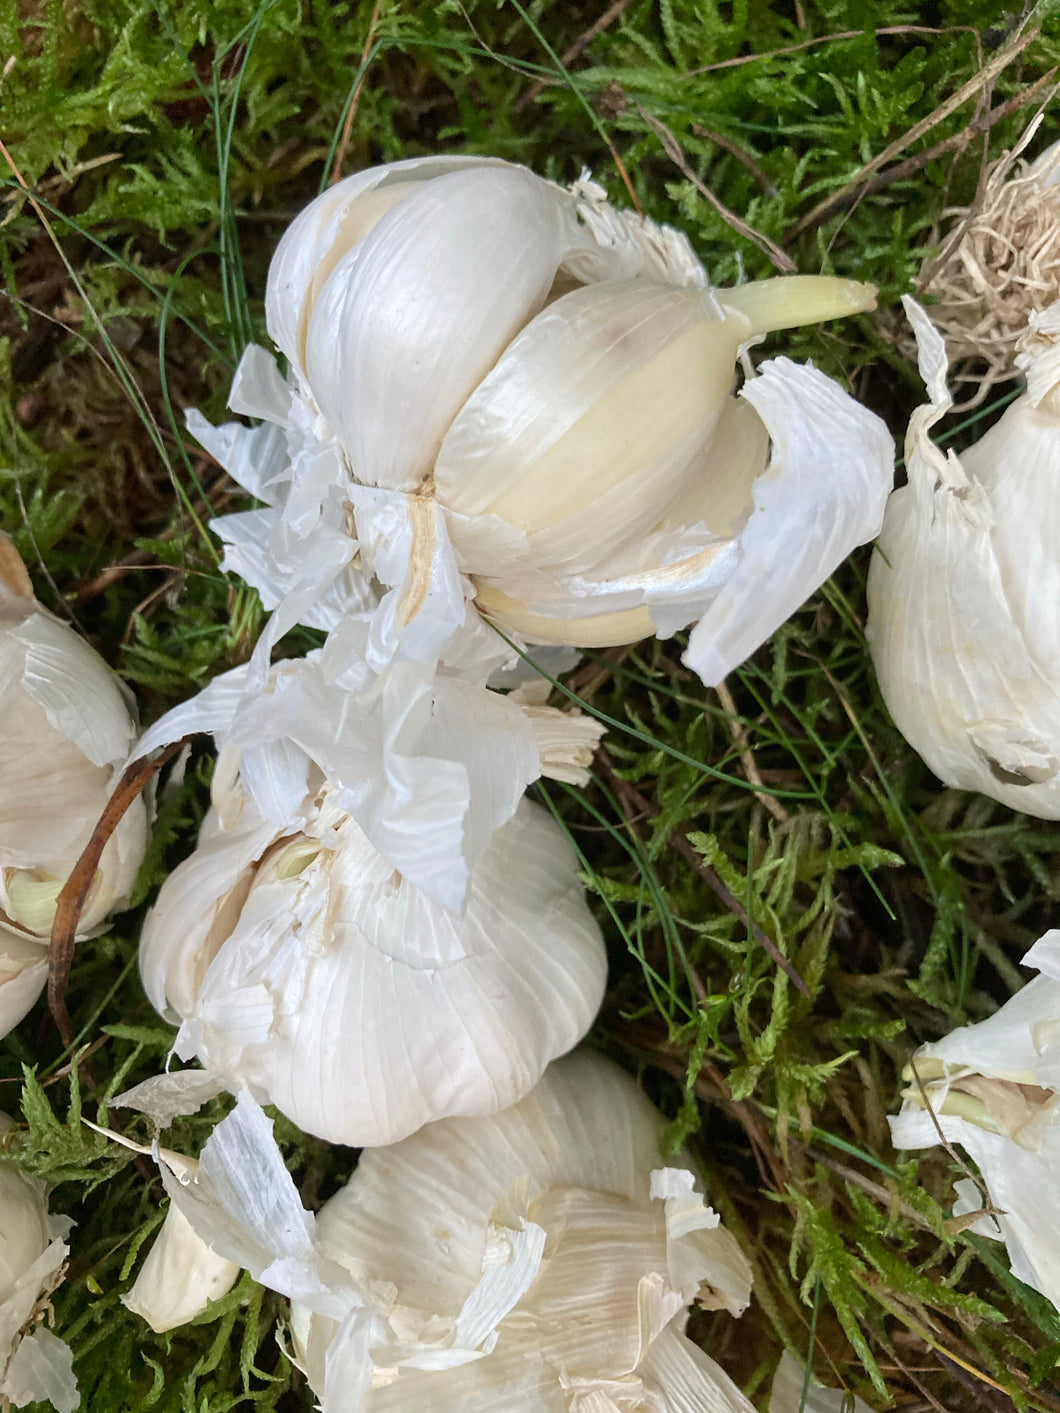 10 bulbs of Garlic for Grow-Your-Own Includes Postage